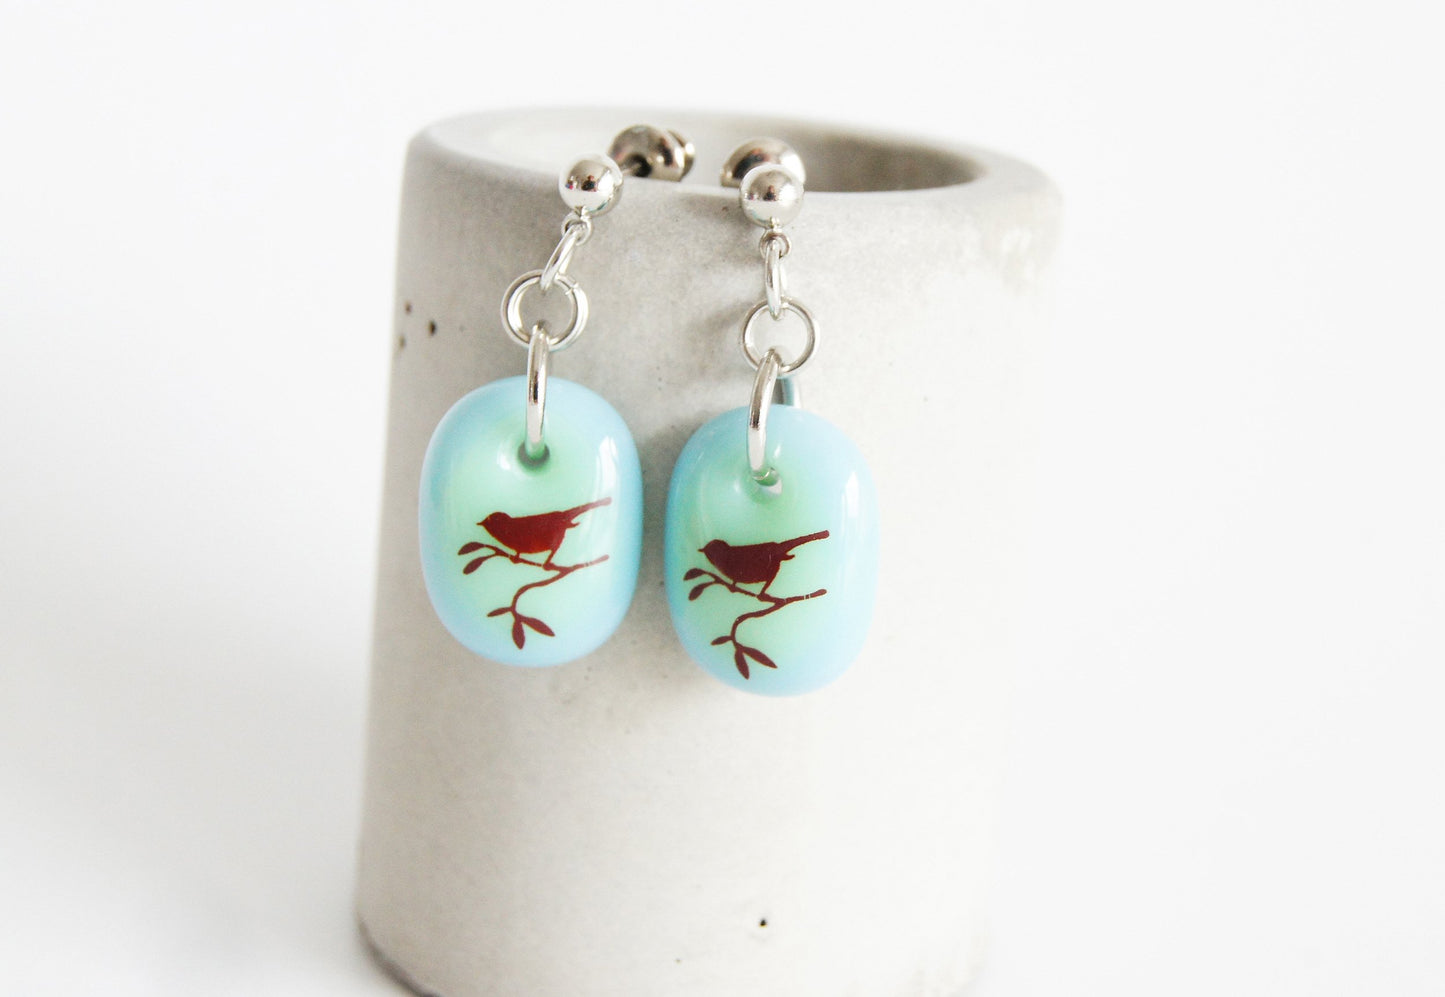 Songbird earrings in pale blue and green glass.